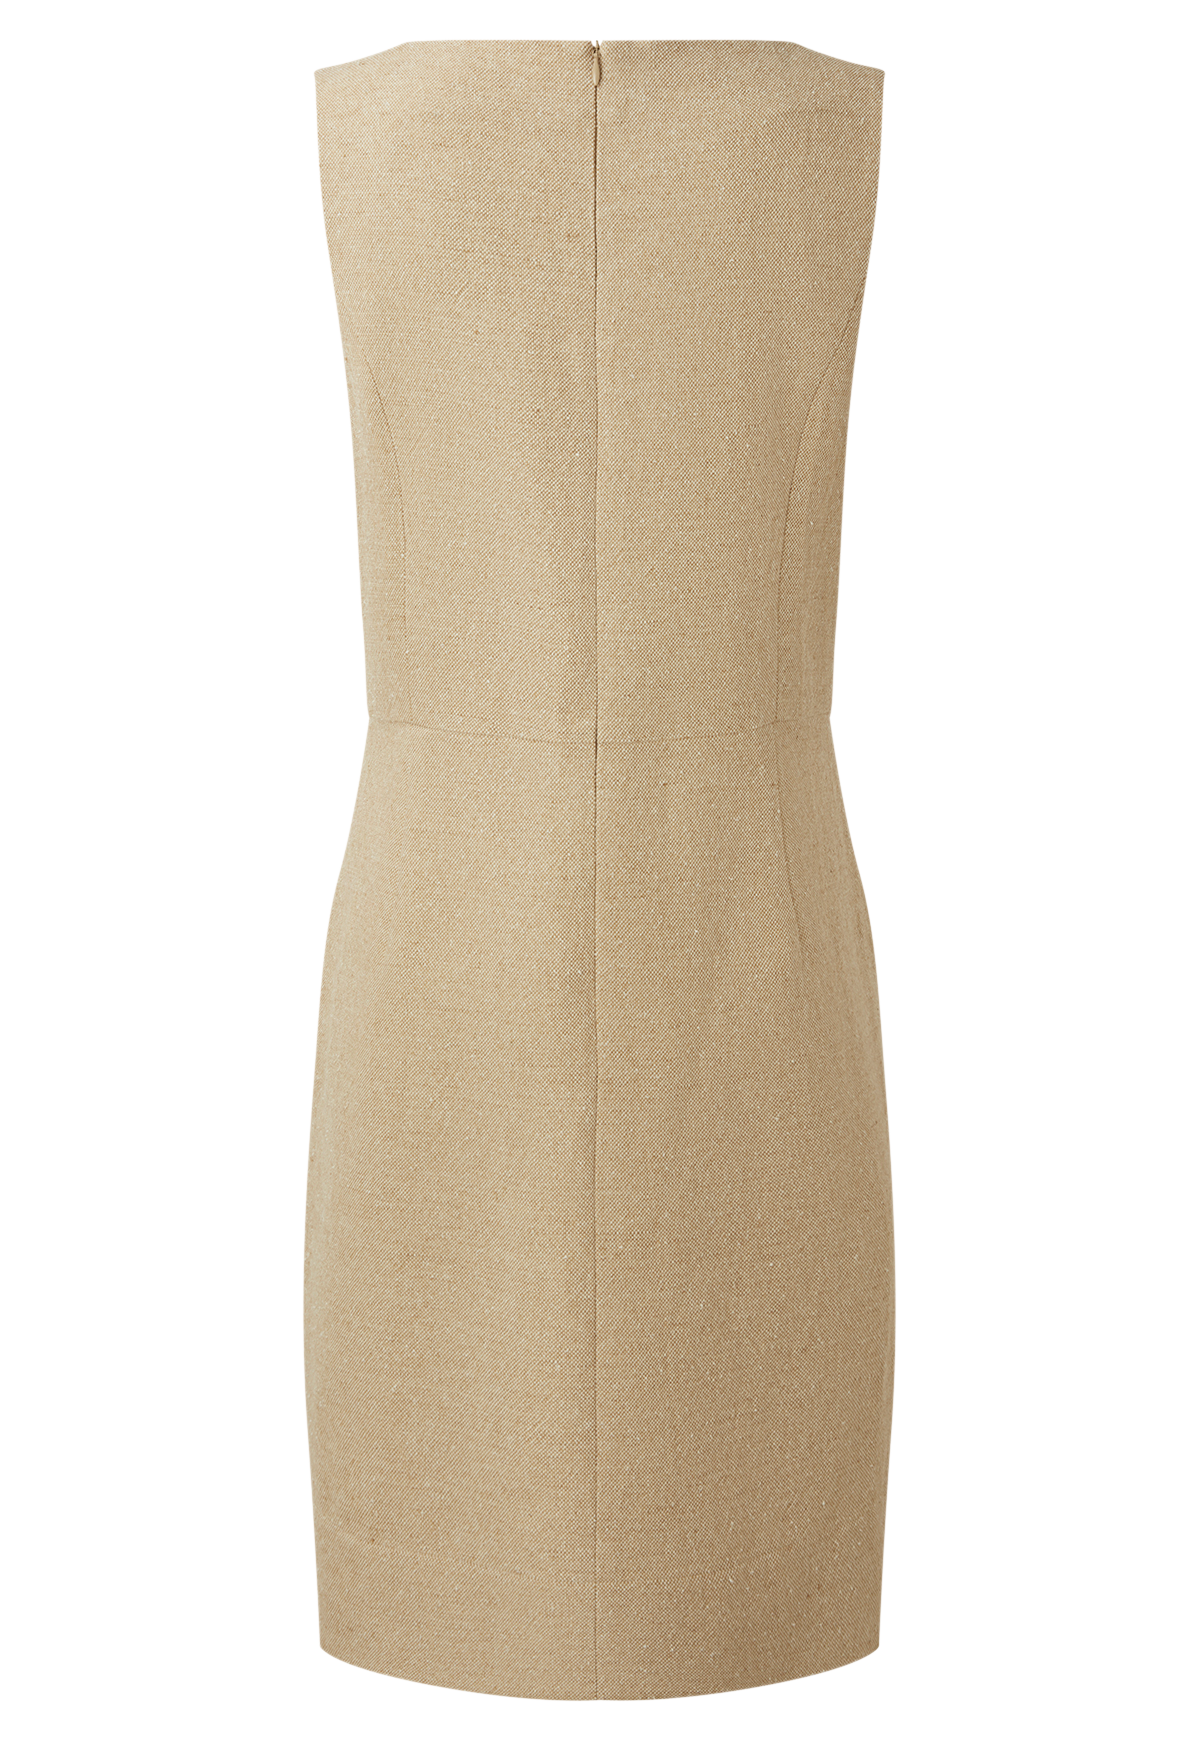 THE JACKIE DRESS in NATURAL SUMMER TWEED LINEN